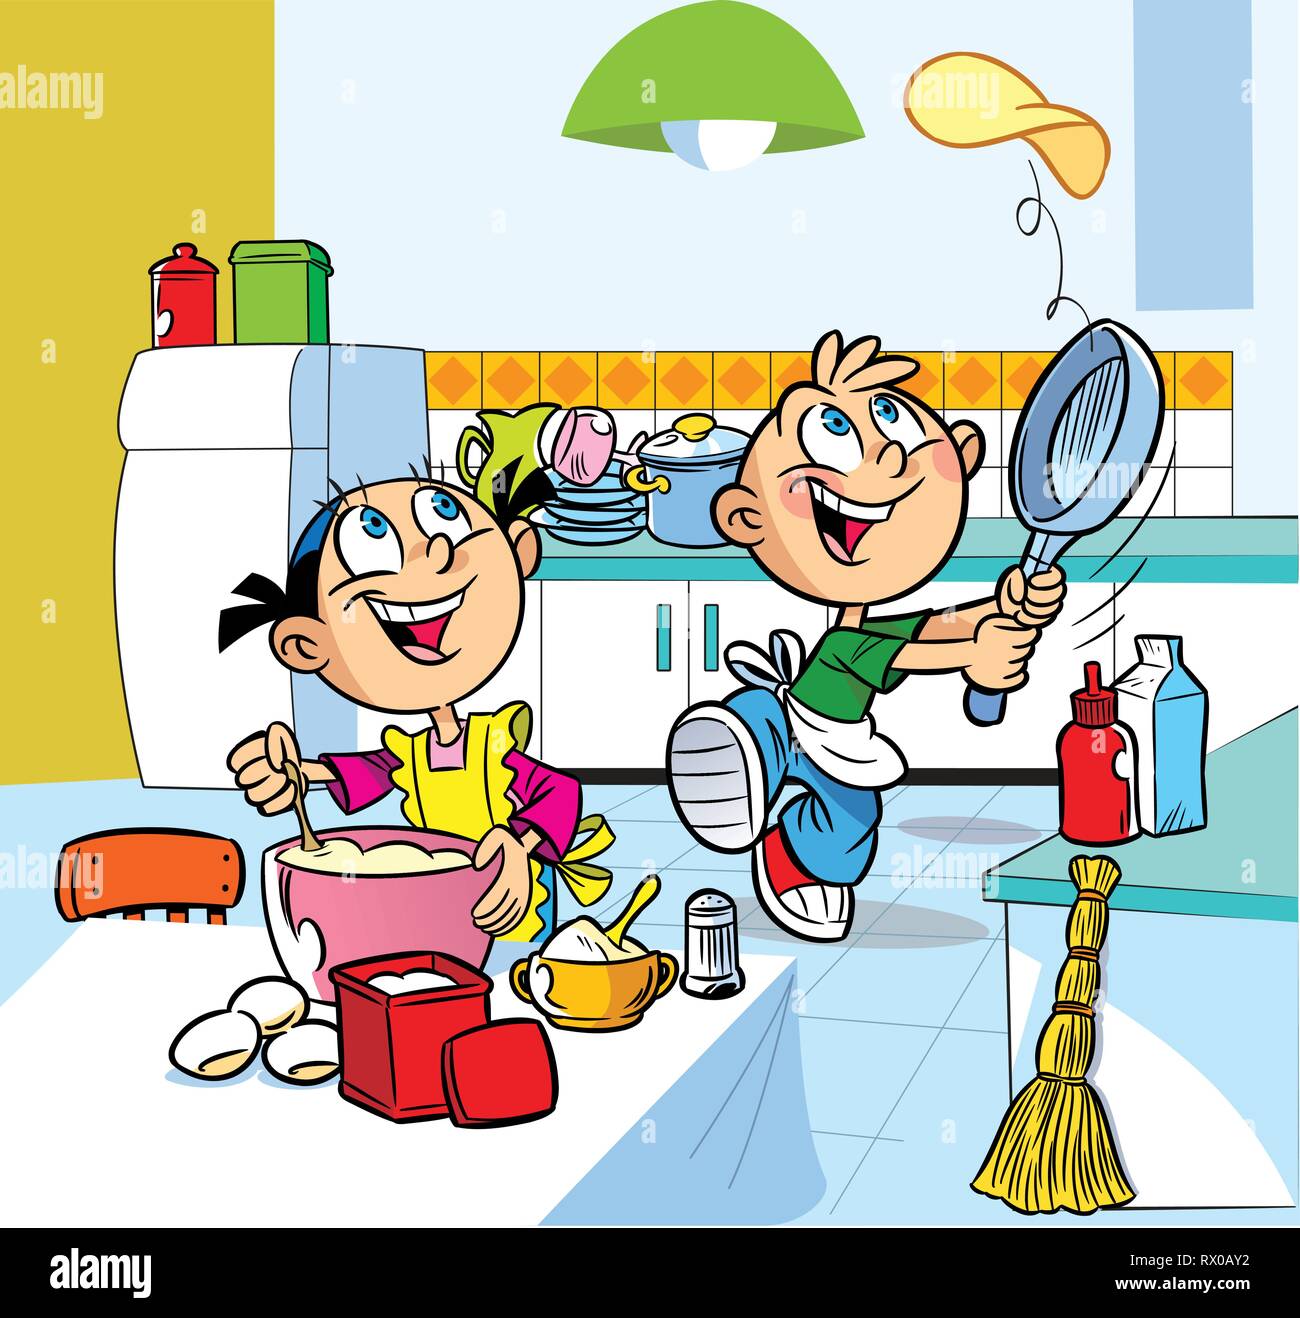 In vector illustration, cartoon girl and boy prepare food in the kitchen. Fun kids bake pancakes. Stock Vector